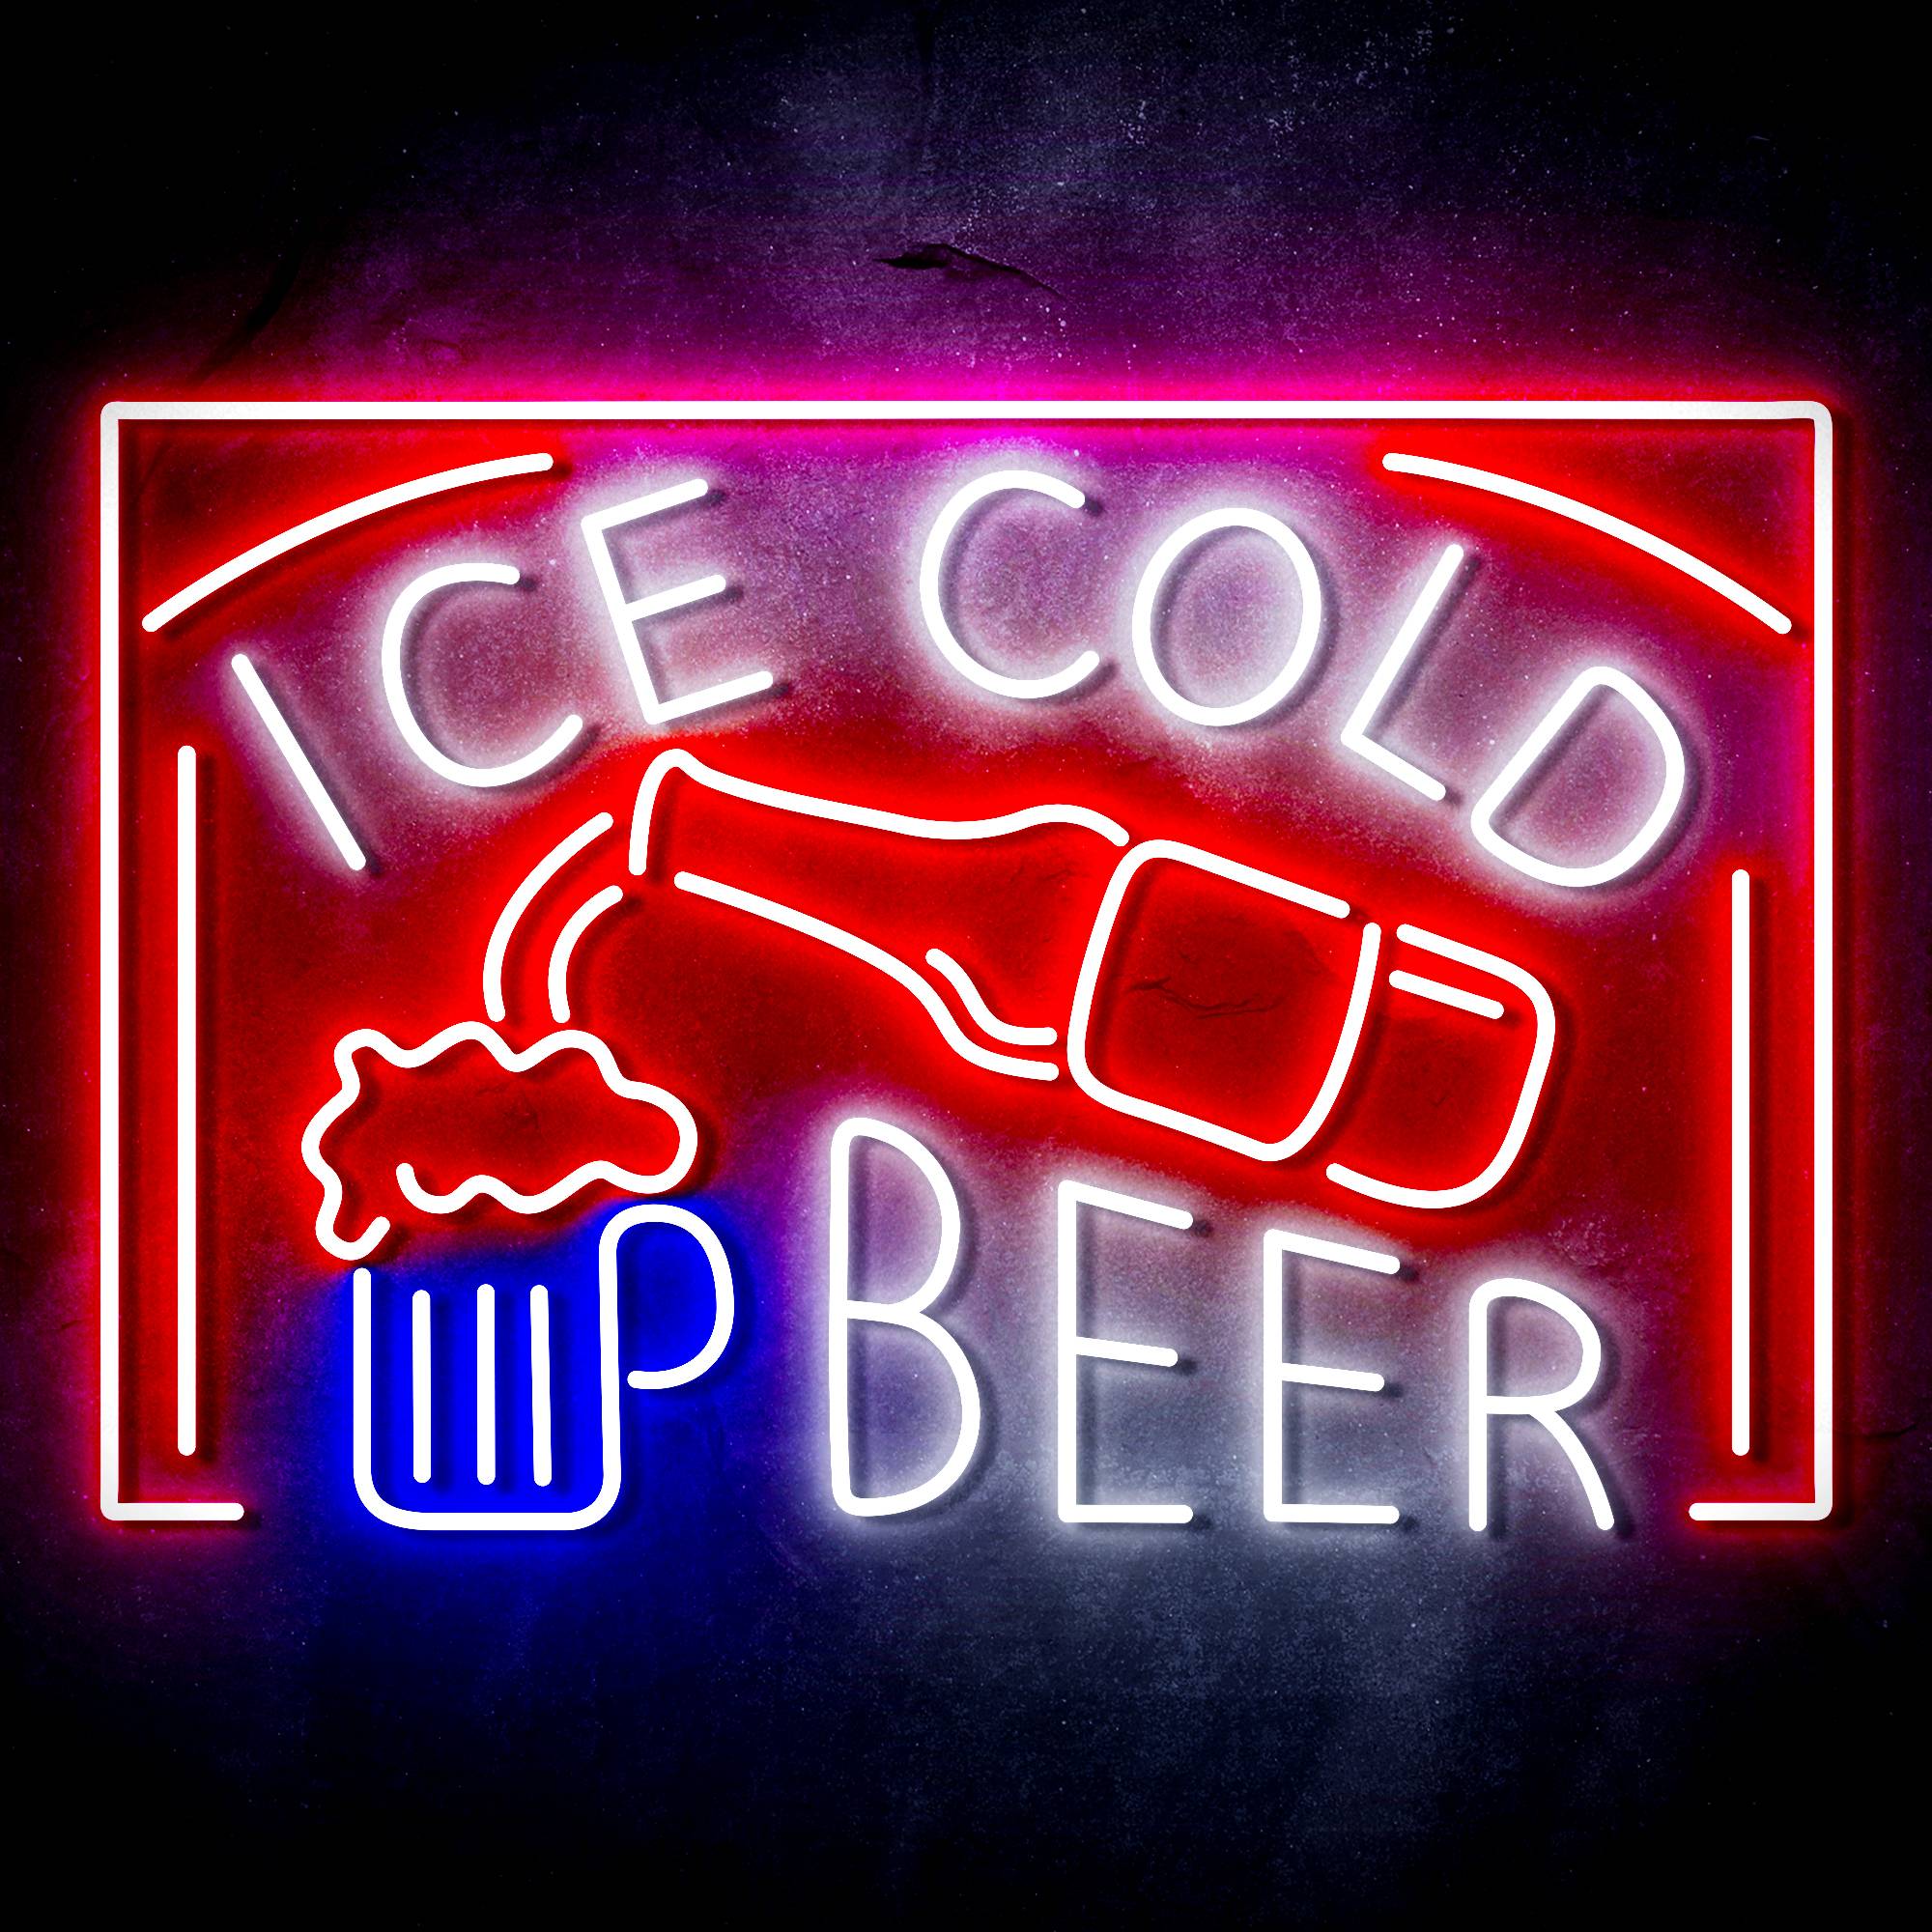 ICE COLD BEER Signag LED Neon Sign